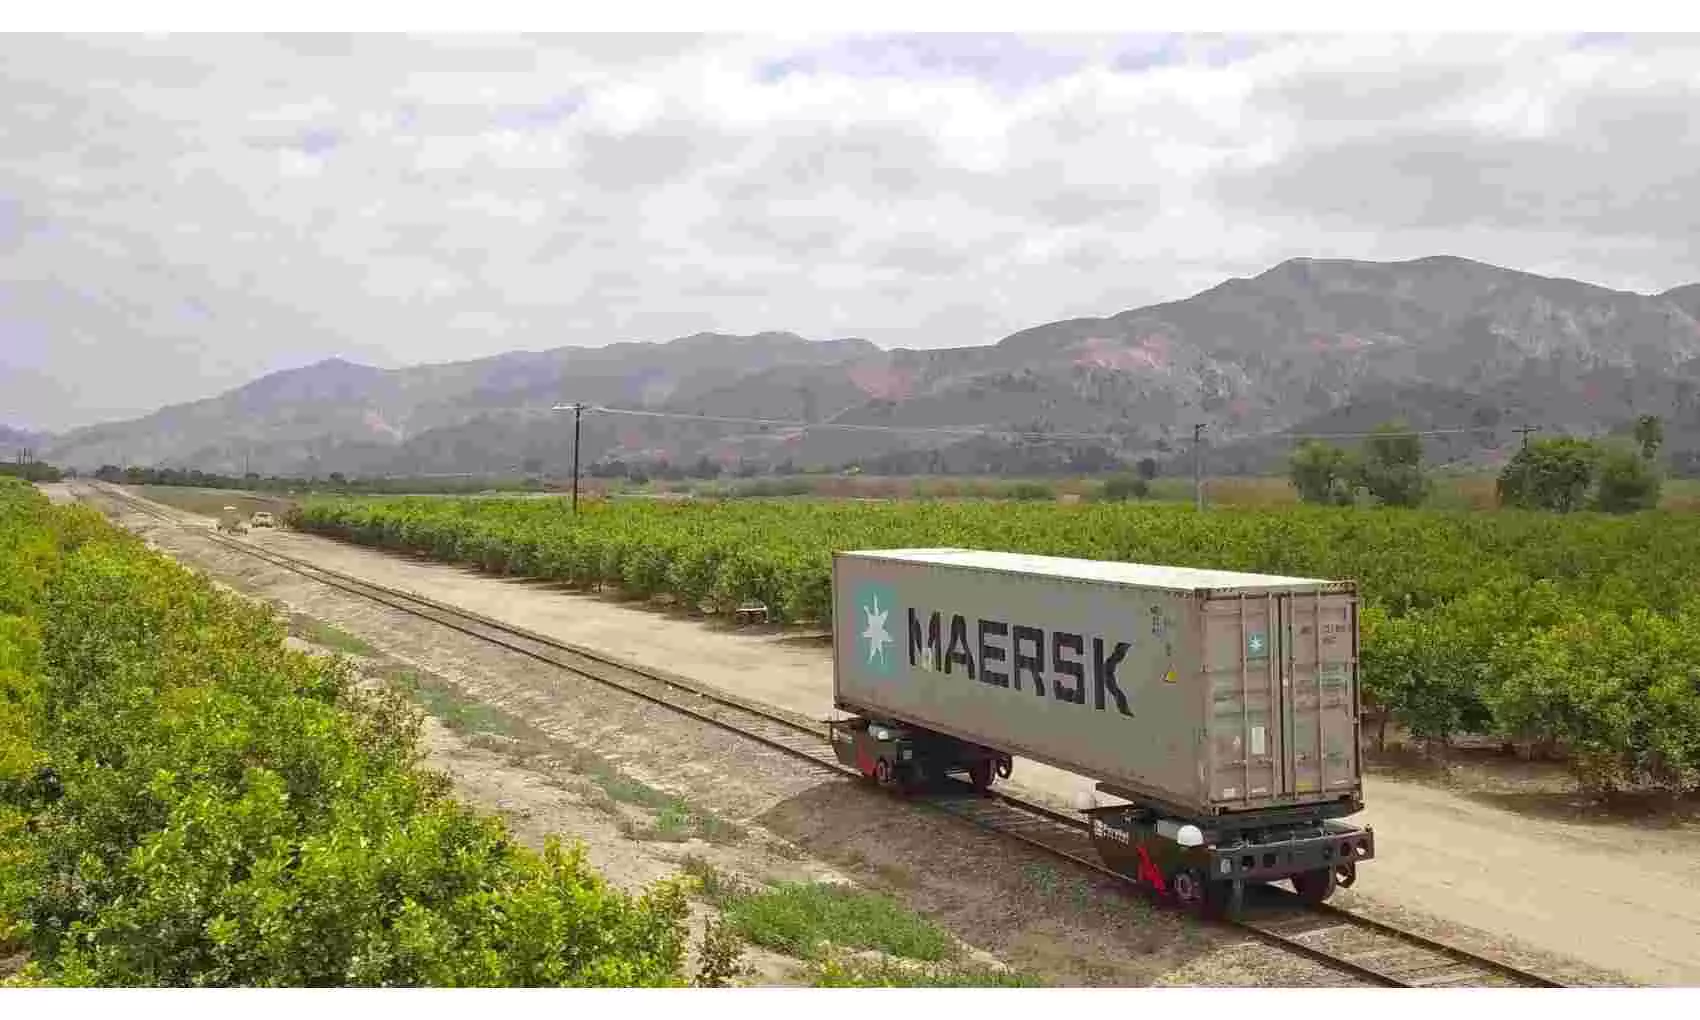 Former SpaceX colleagues come together to build energy-efficient autonomous freight train cars